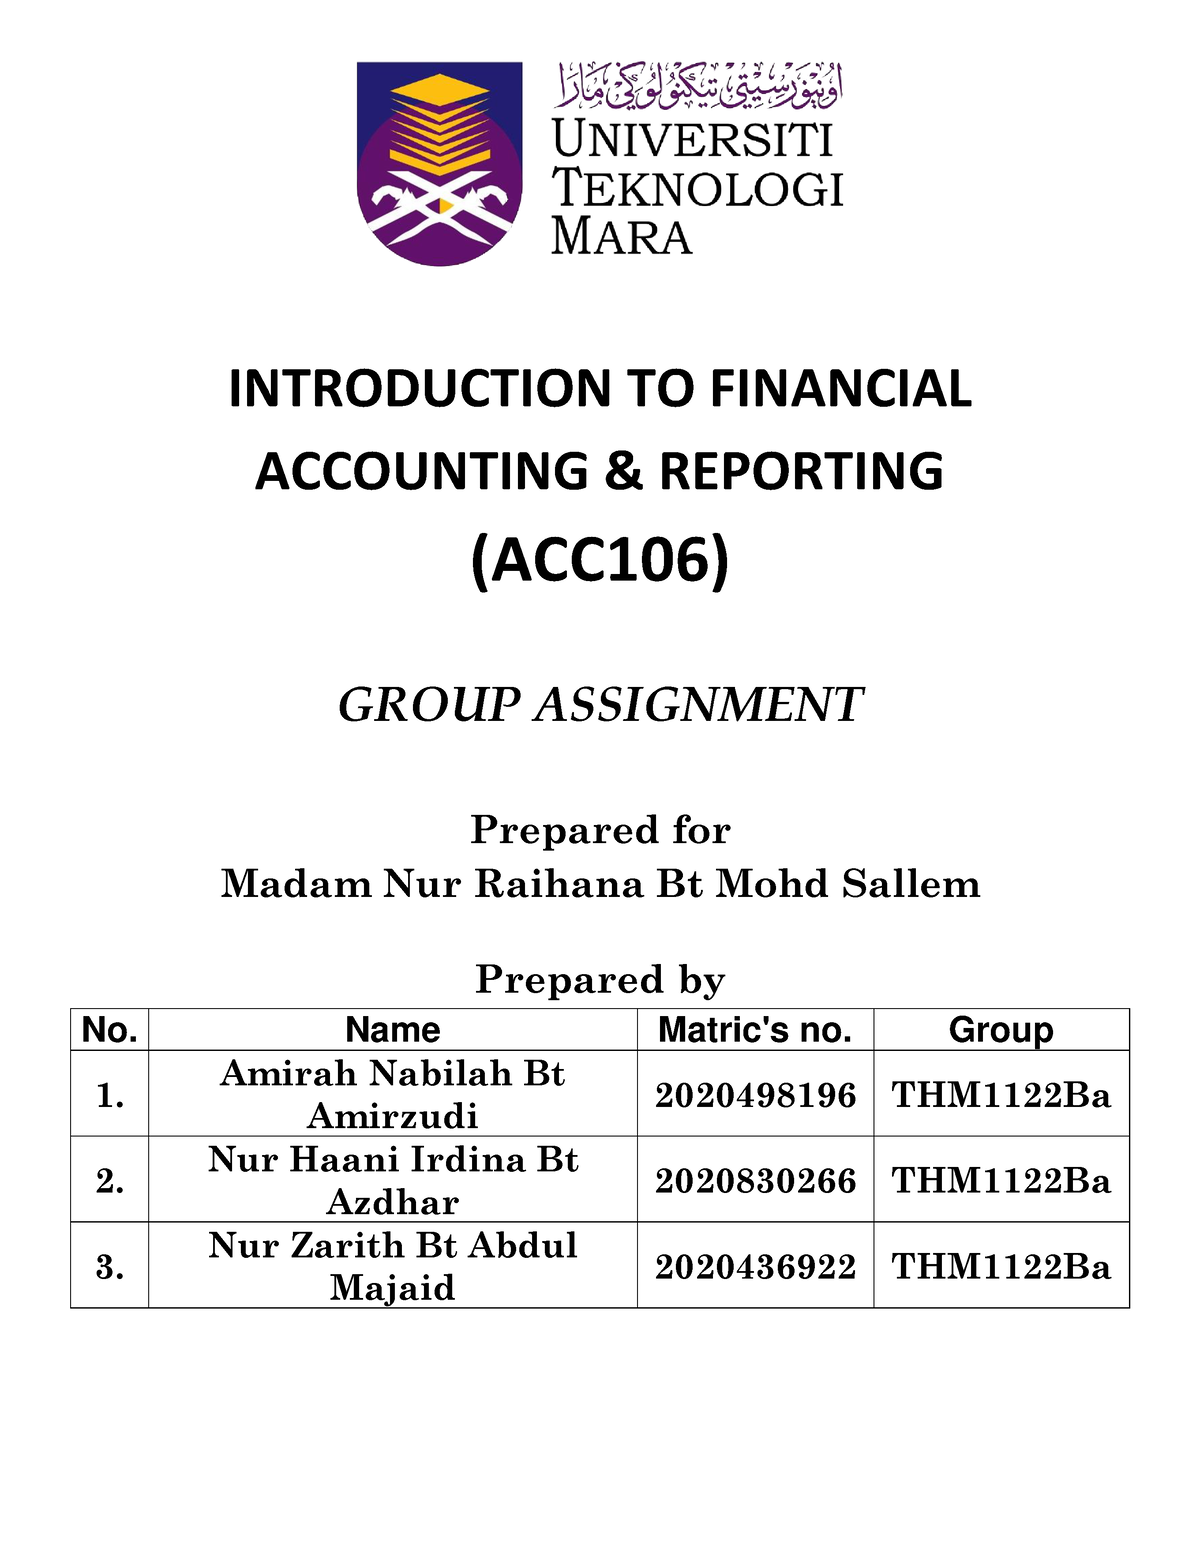 acc106 assignment introduction